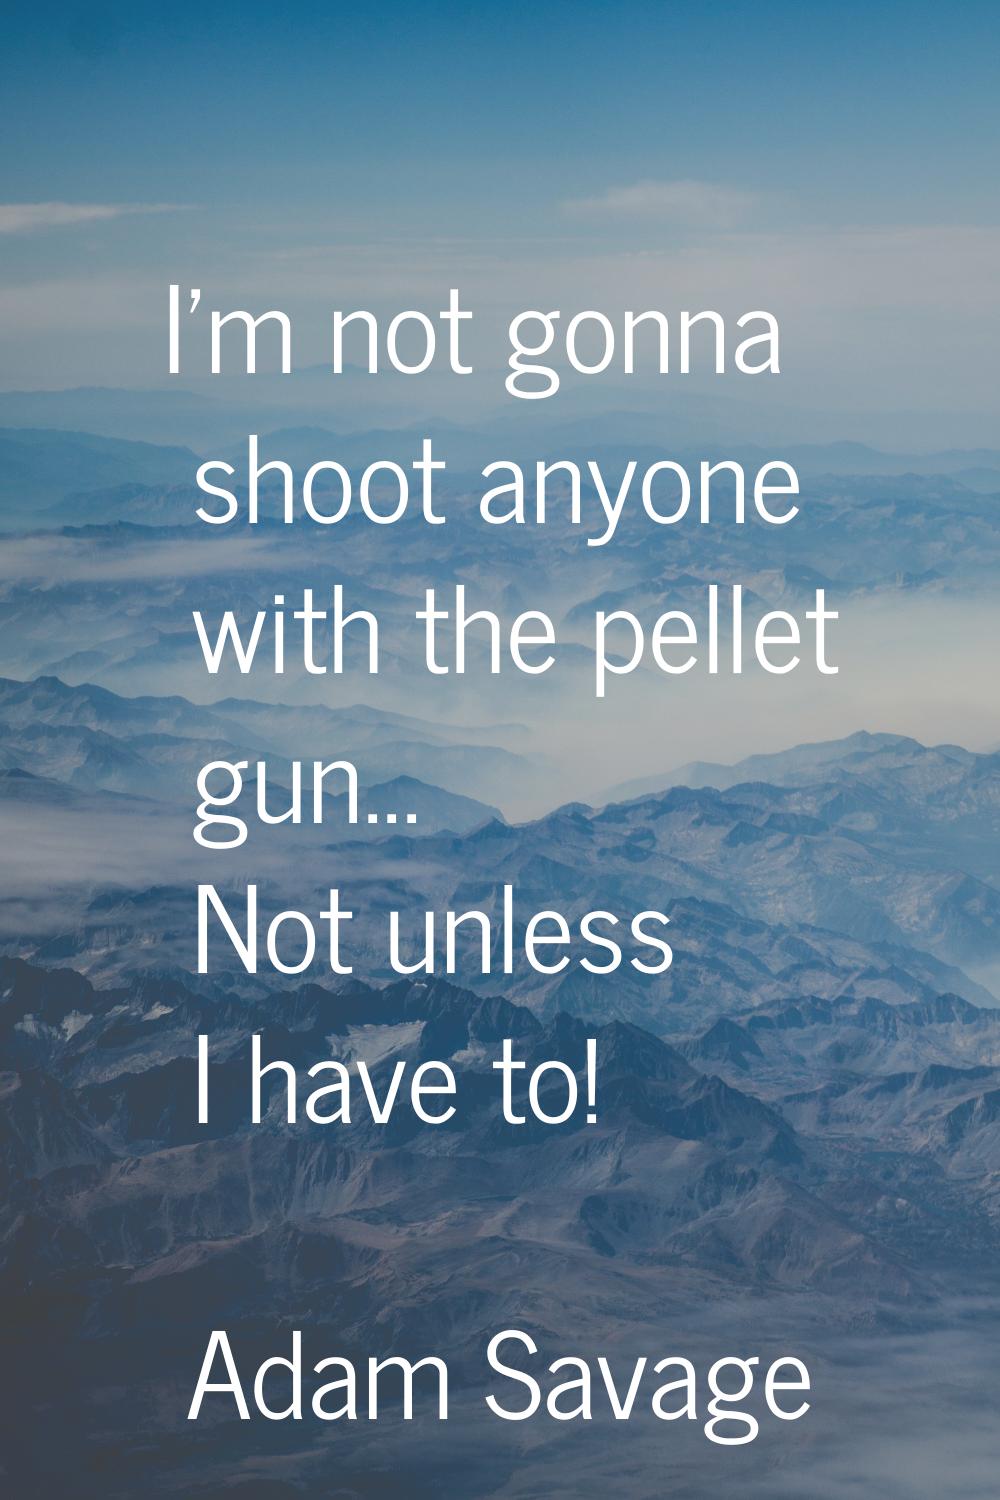 I'm not gonna shoot anyone with the pellet gun... Not unless I have to!